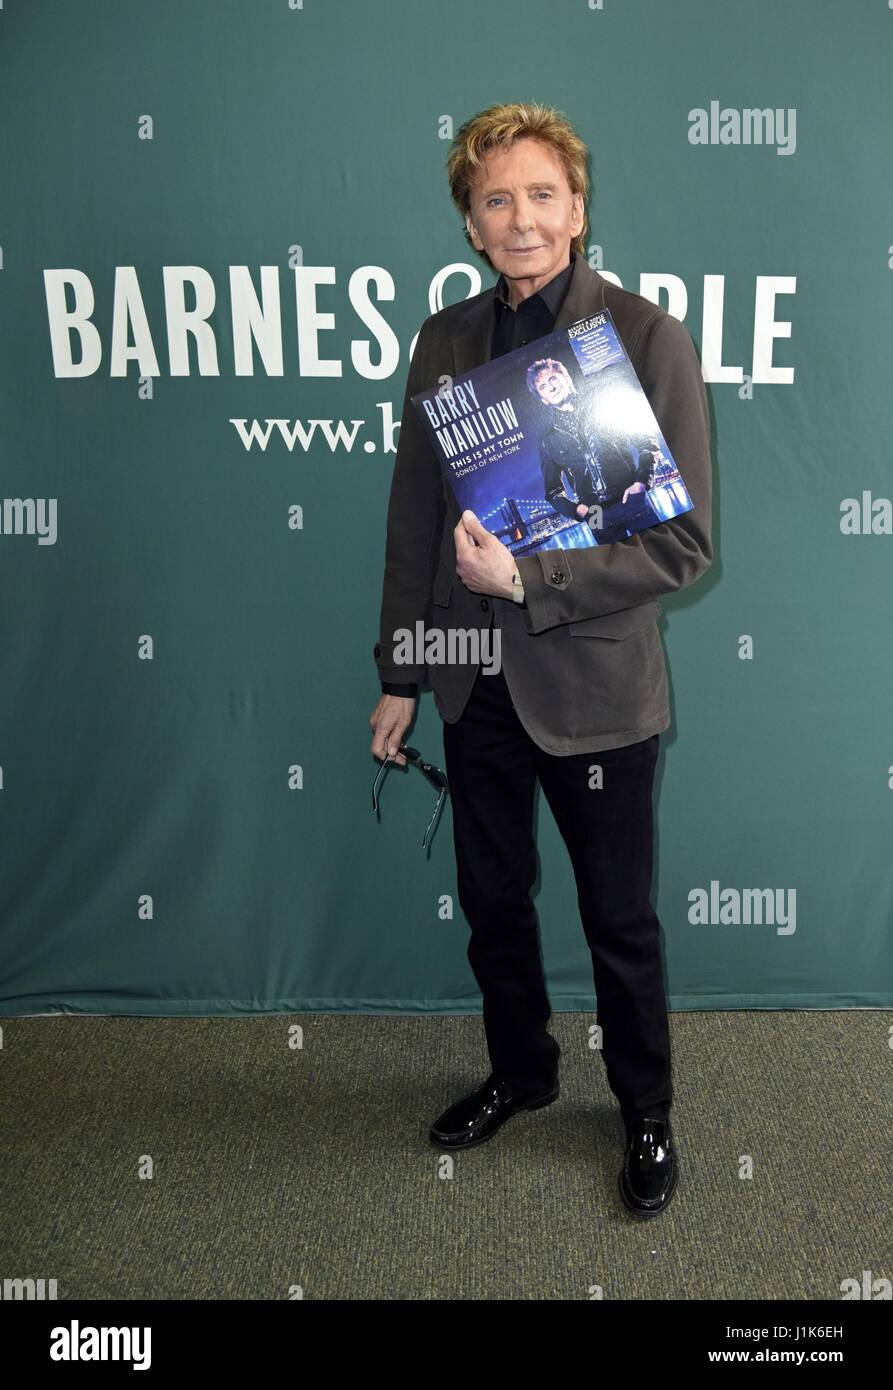 New York, NY, USA. 21st Apr, 2017. Barry Manilow at in-store appearance for Barry Manilow Book Signing for THIS IS MY TOWN, Barnes and Noble Book Store, New York, NY April 21, 2017. Credit: Derek Storm/Everett Collection/Alamy Live News Stock Photo